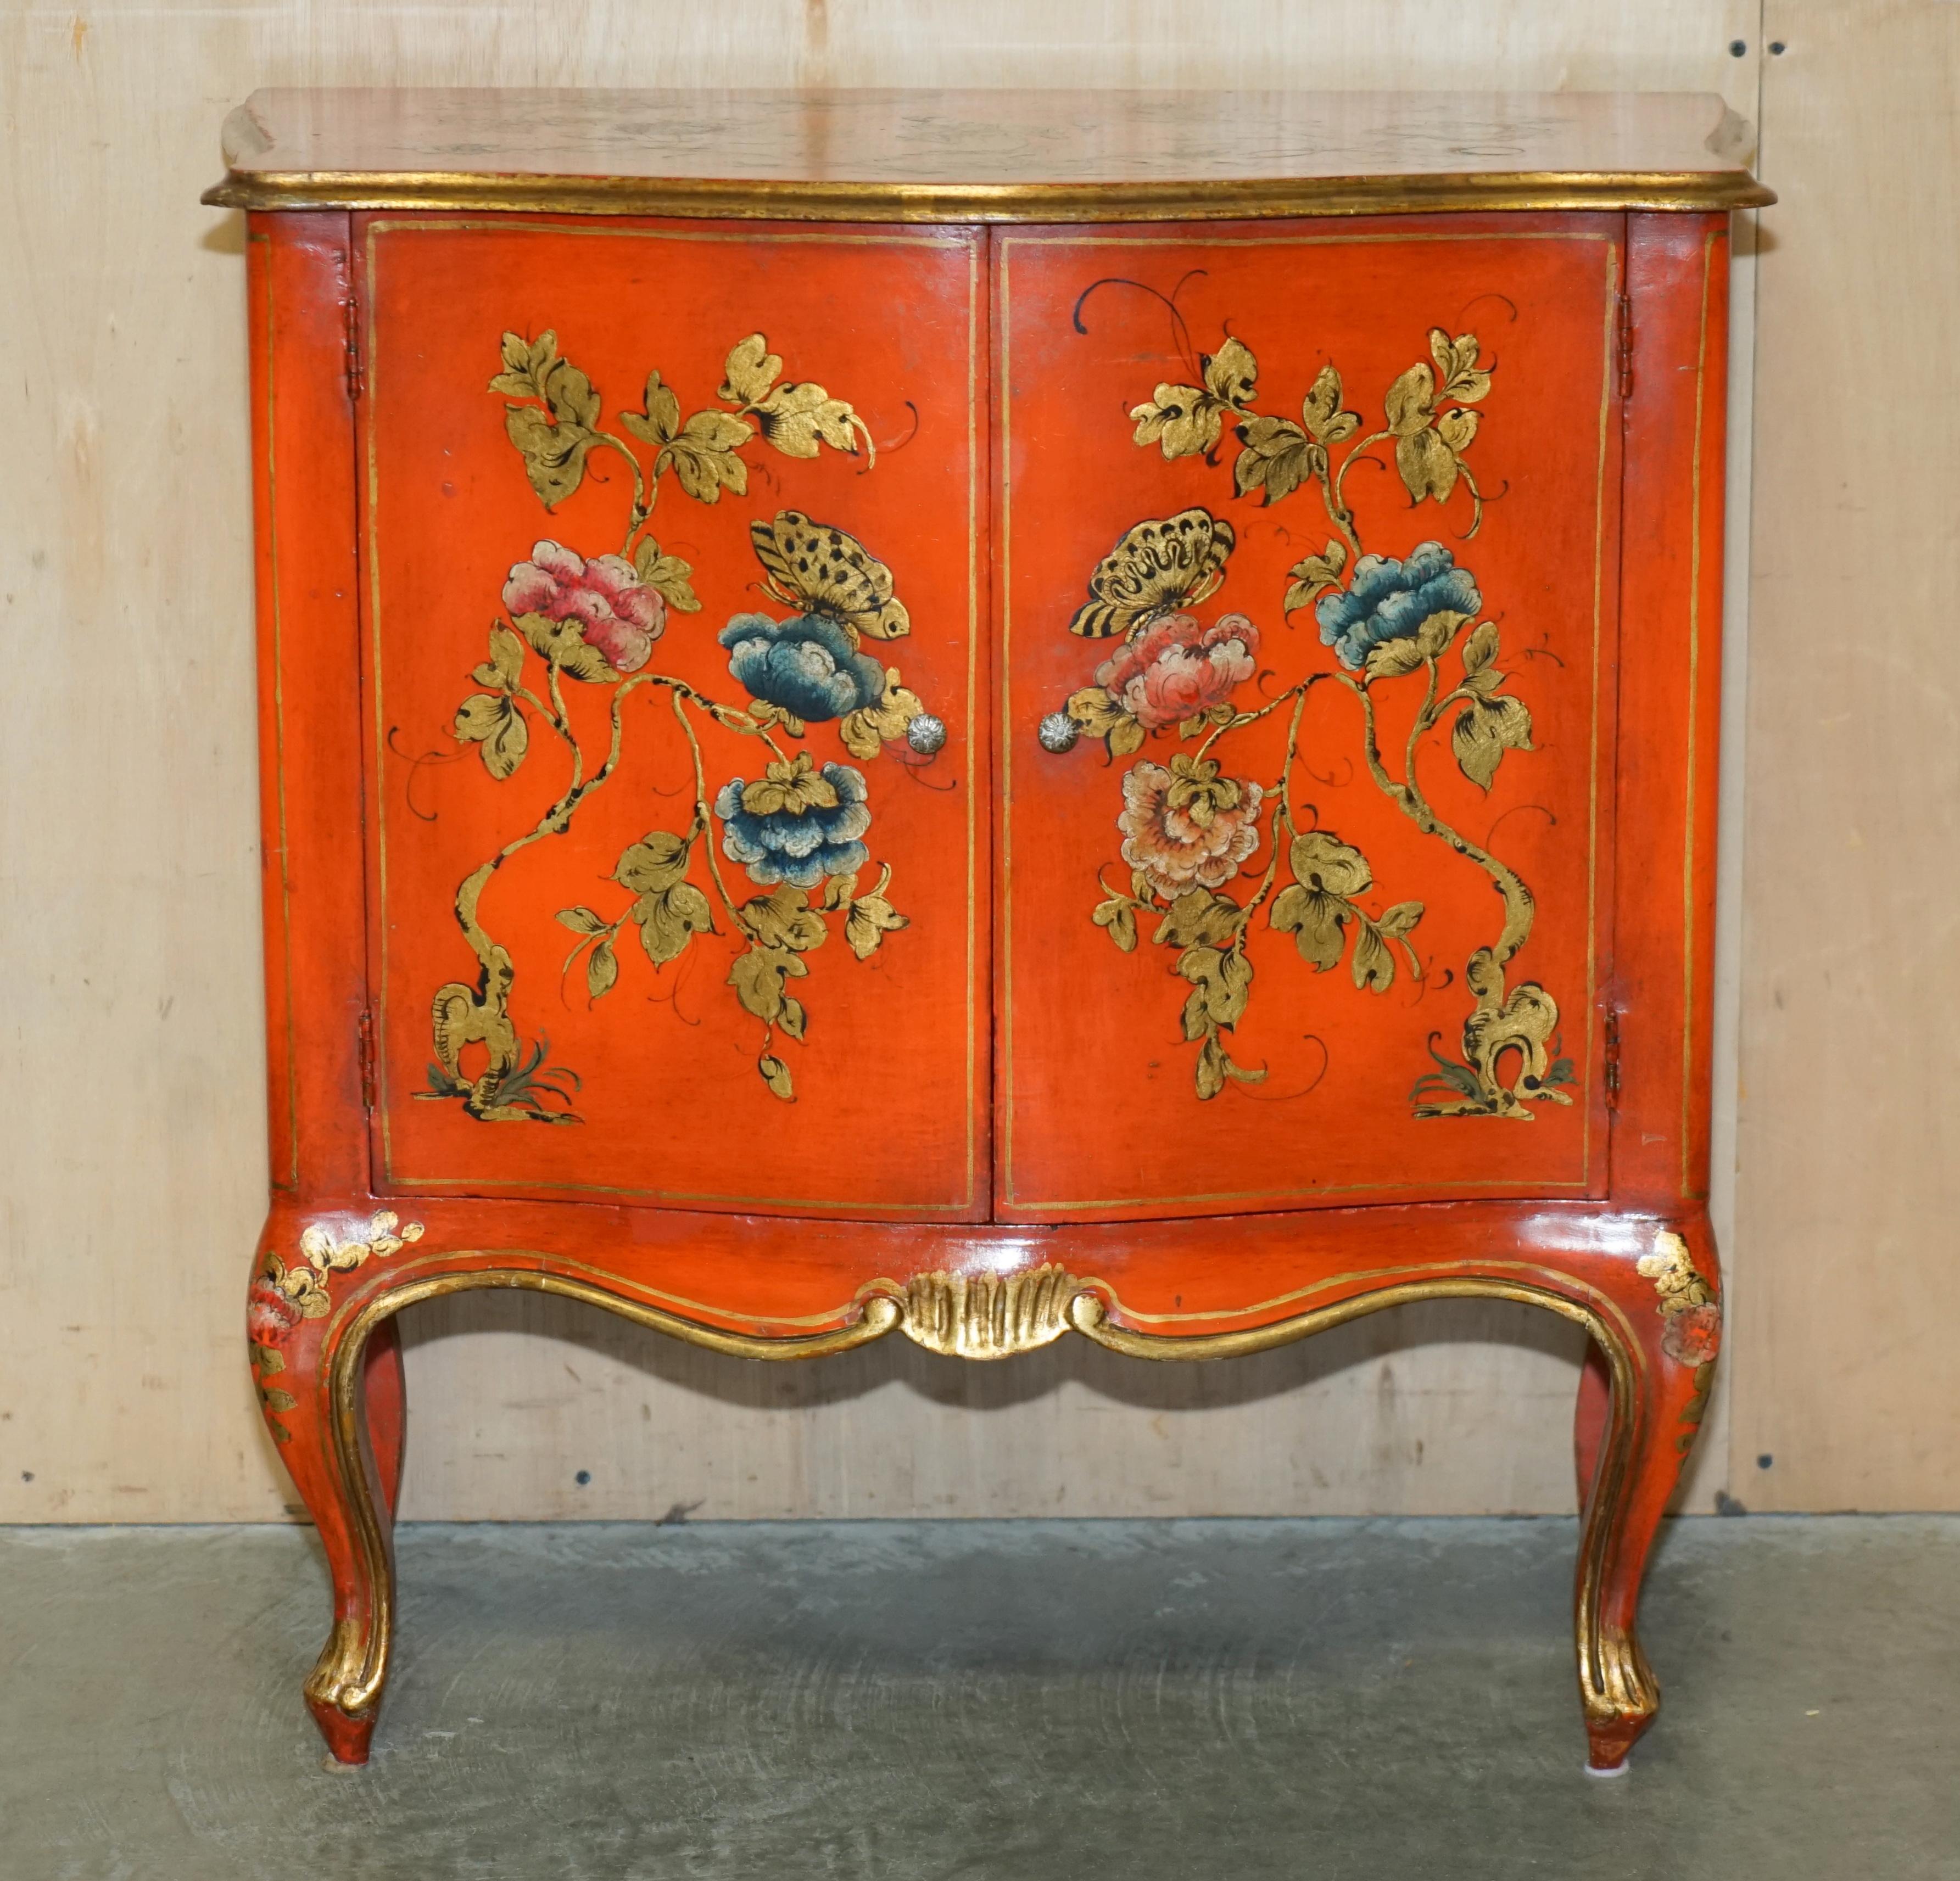 Chinoiserie STUNNING 1920's VINTAGE CHINESE CHINOISERIE GEISHA GIRLS LACQUER SIDE CABINET For Sale